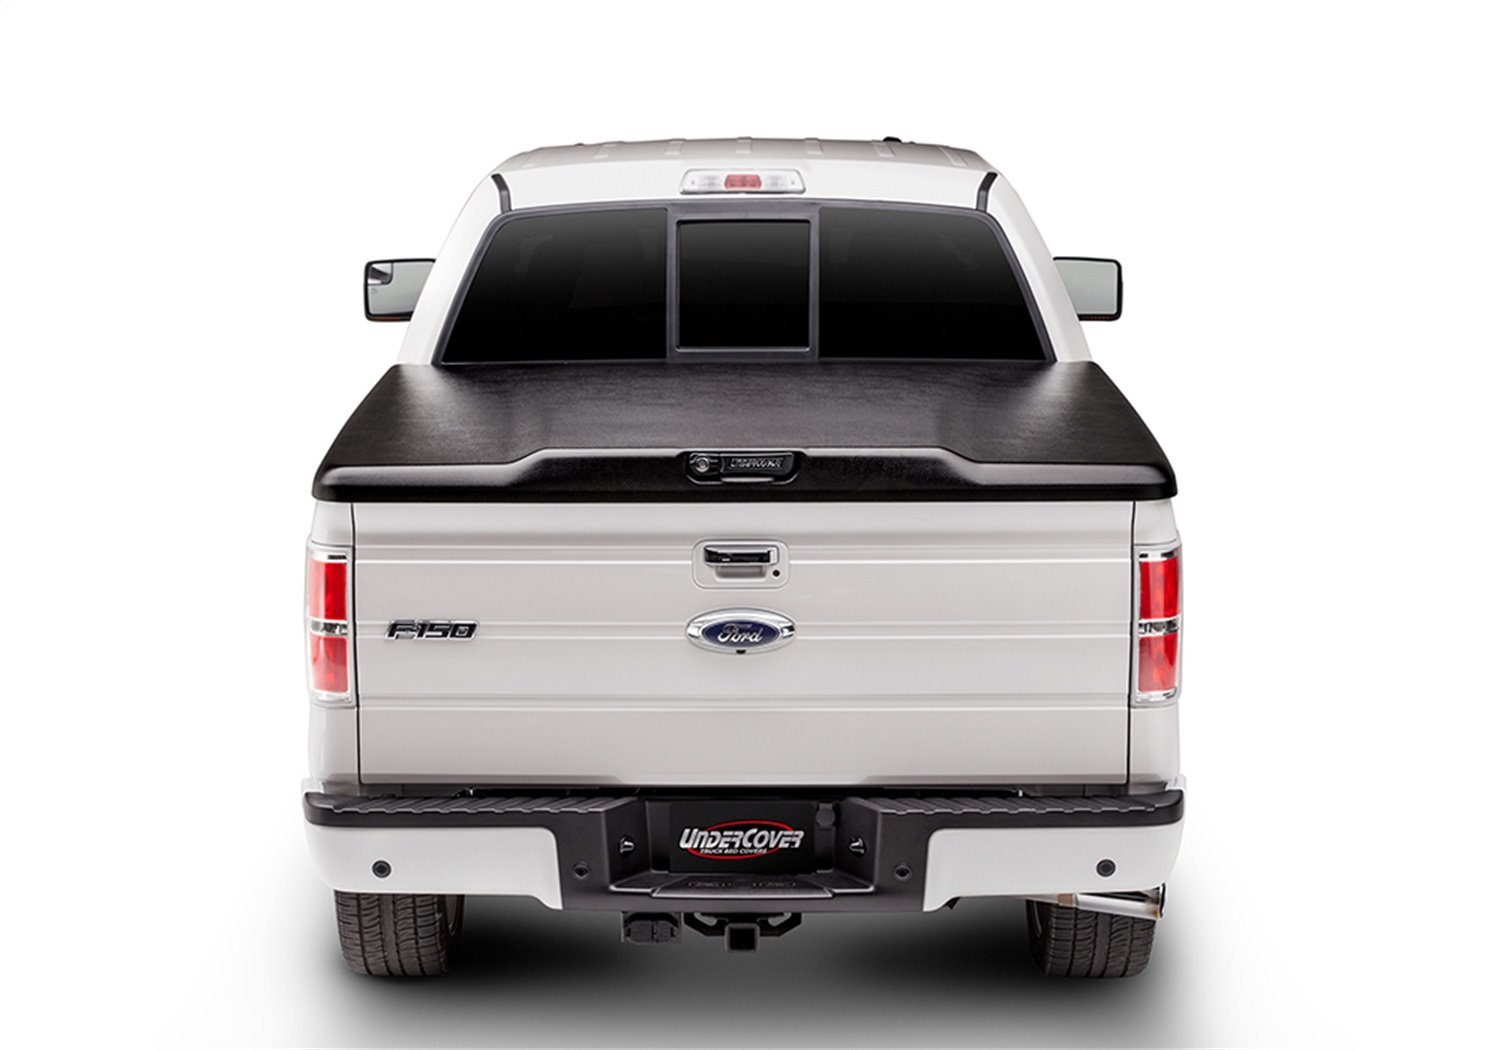 UC2148 Elite Hard Non-Folding Cover, 2009-2014 Ford F-150 5'7" Bed EXT/Crew Cab, Black Textured